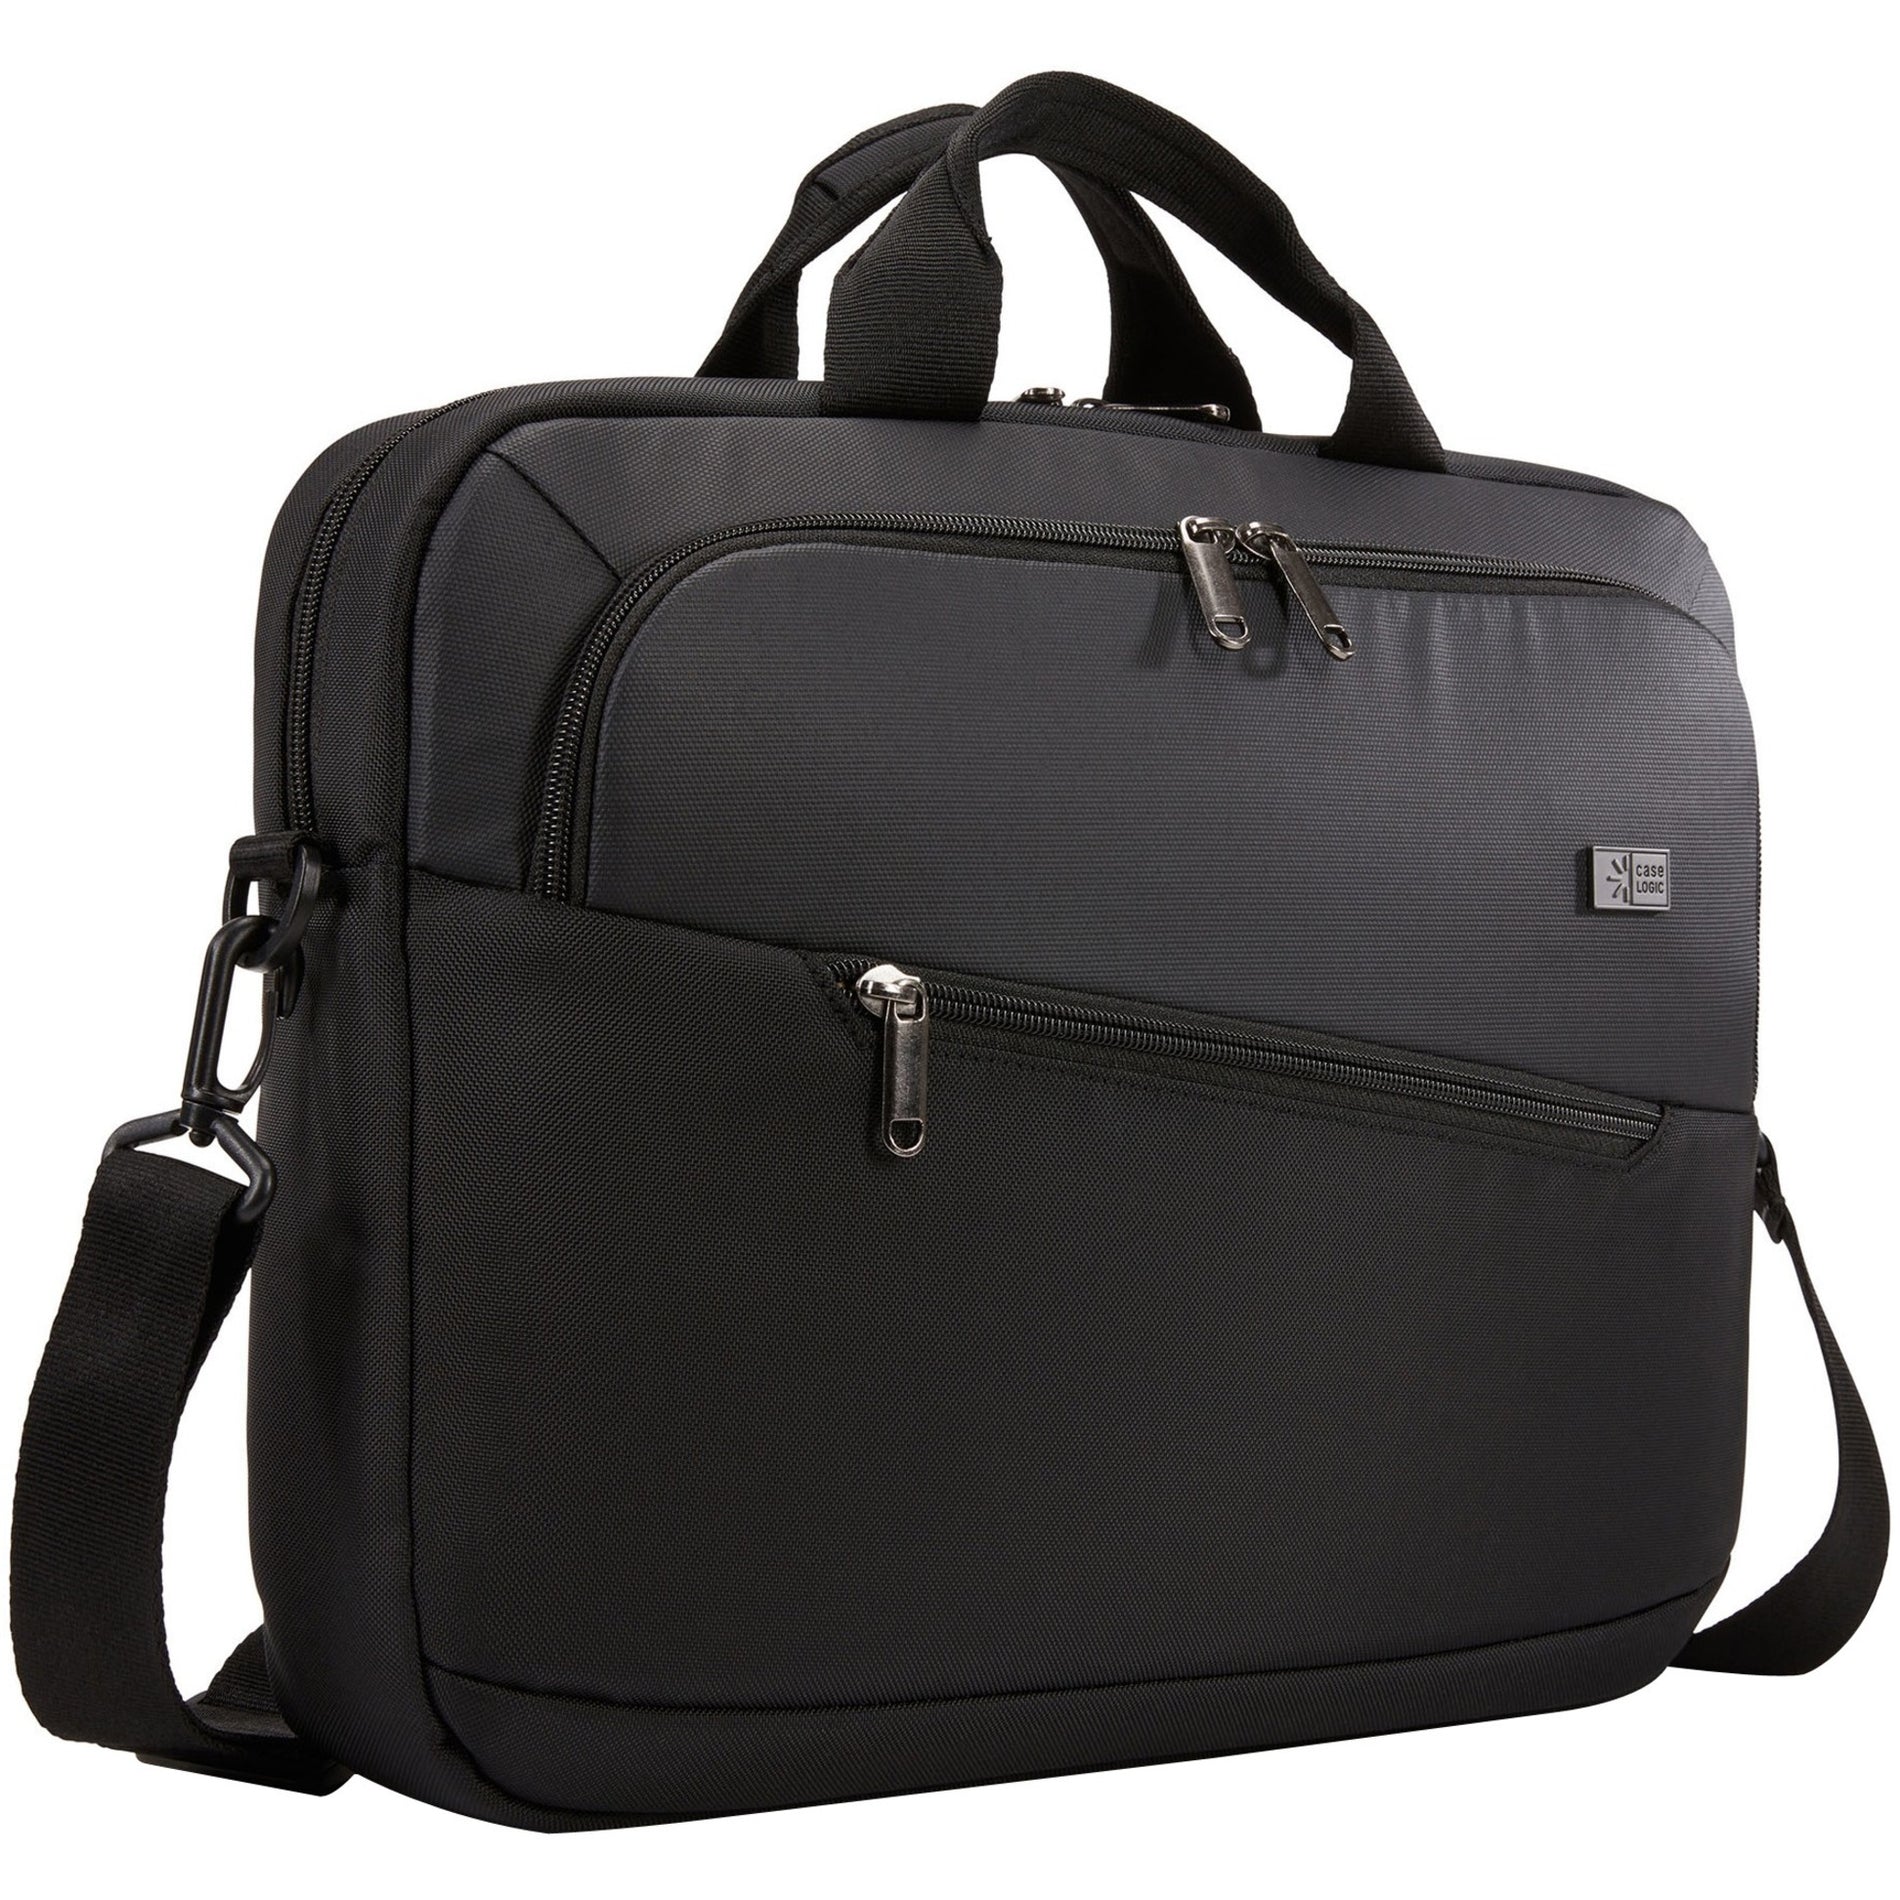 Case Logic 3204526 PROPEL ATT 14IN BLACK, Travel/Luggage Case with Laptop and Tablet Compartment